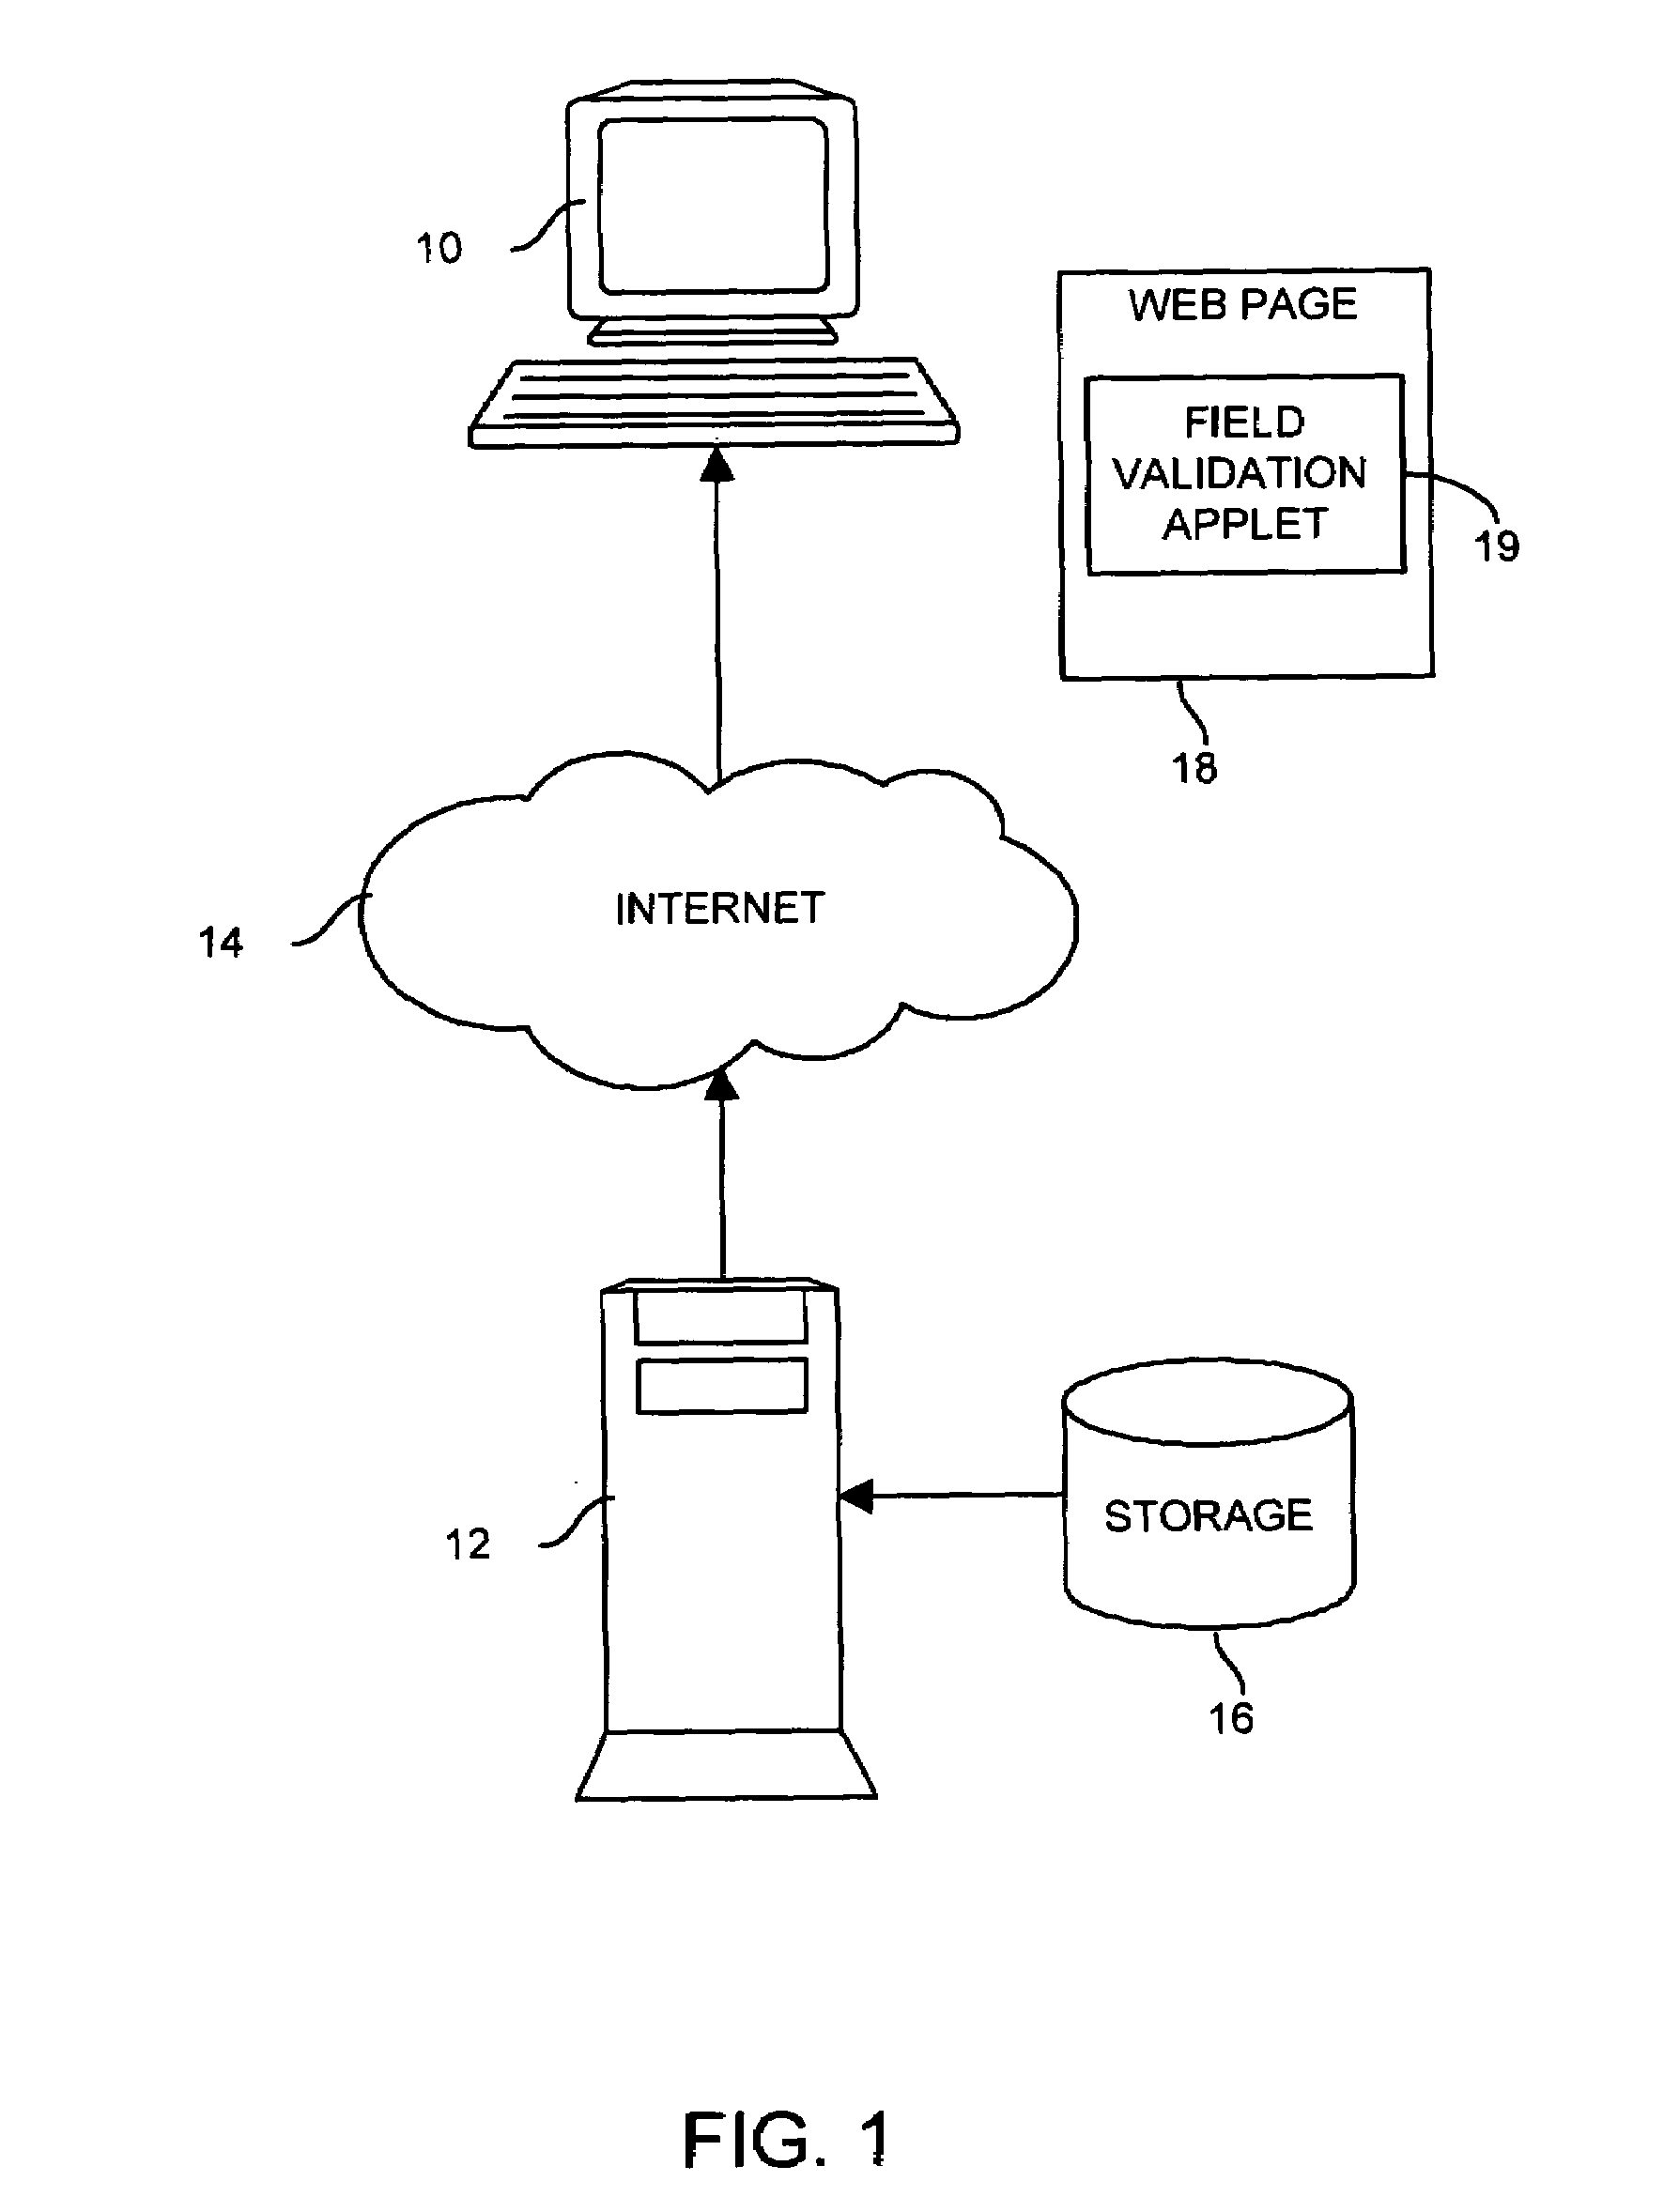 Method and apparatus for validating user input fields in a graphical display